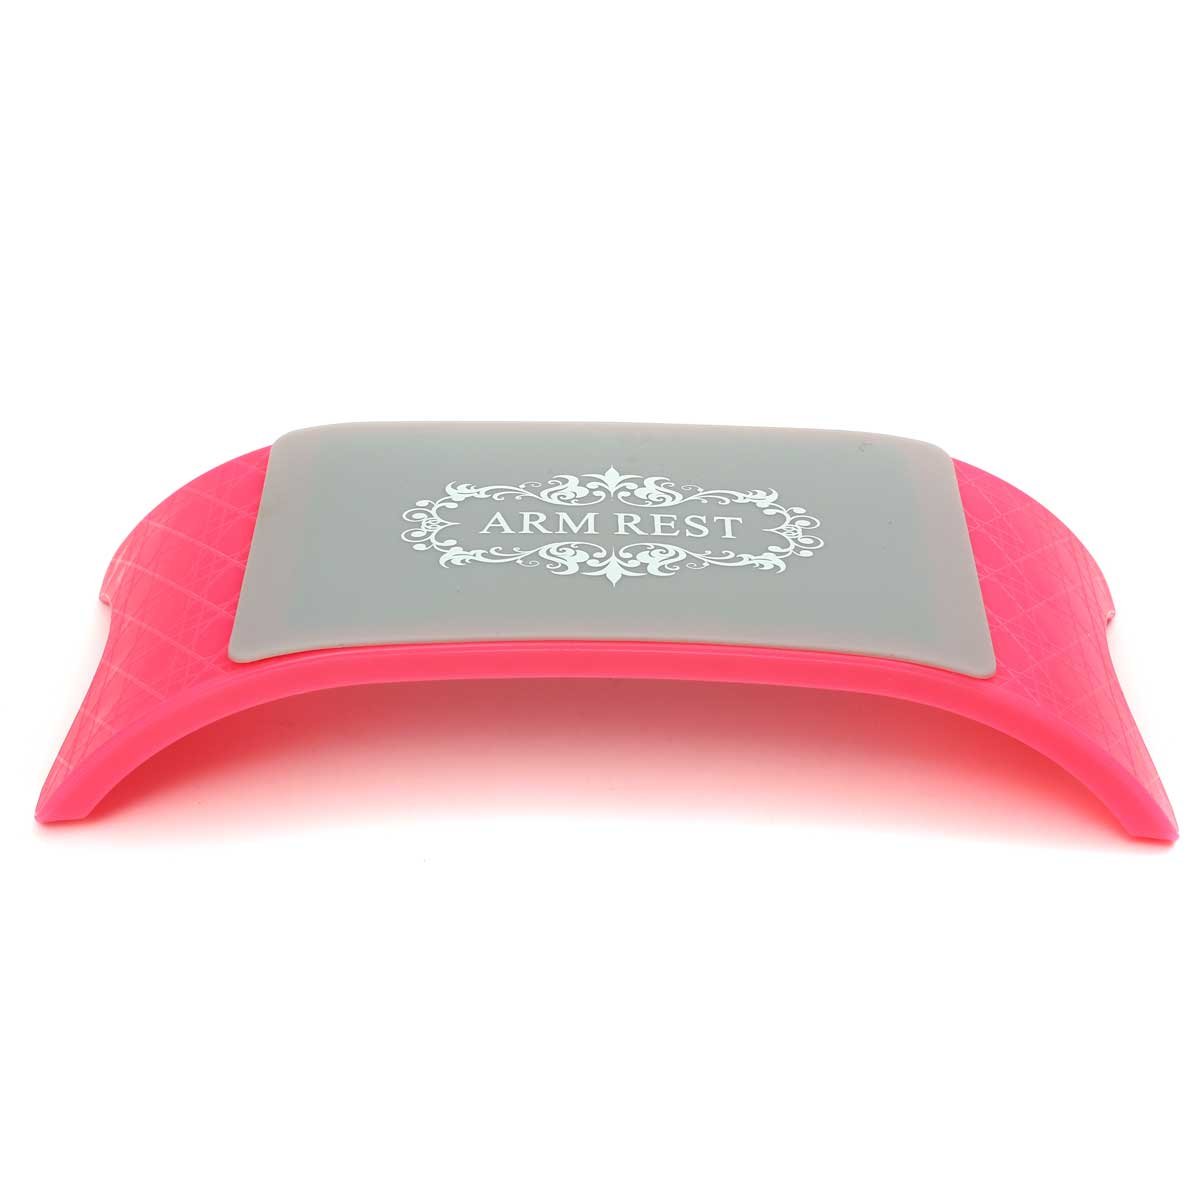 

4 Colors Manicure Hand Holder Nail Art Cushion Pillow Acrylic Rubber Arm Rest Pad Tool, White rose pink purple